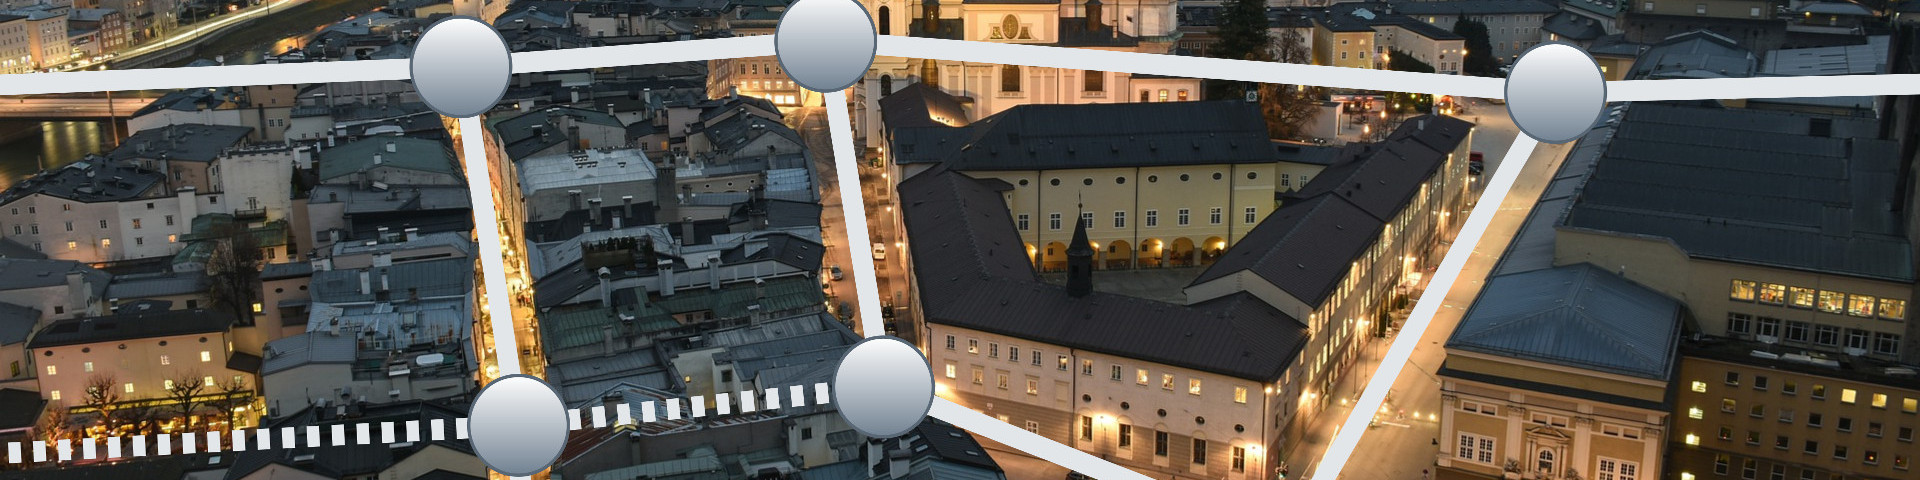 Visualization of street network as a graph in the city of Salzburg